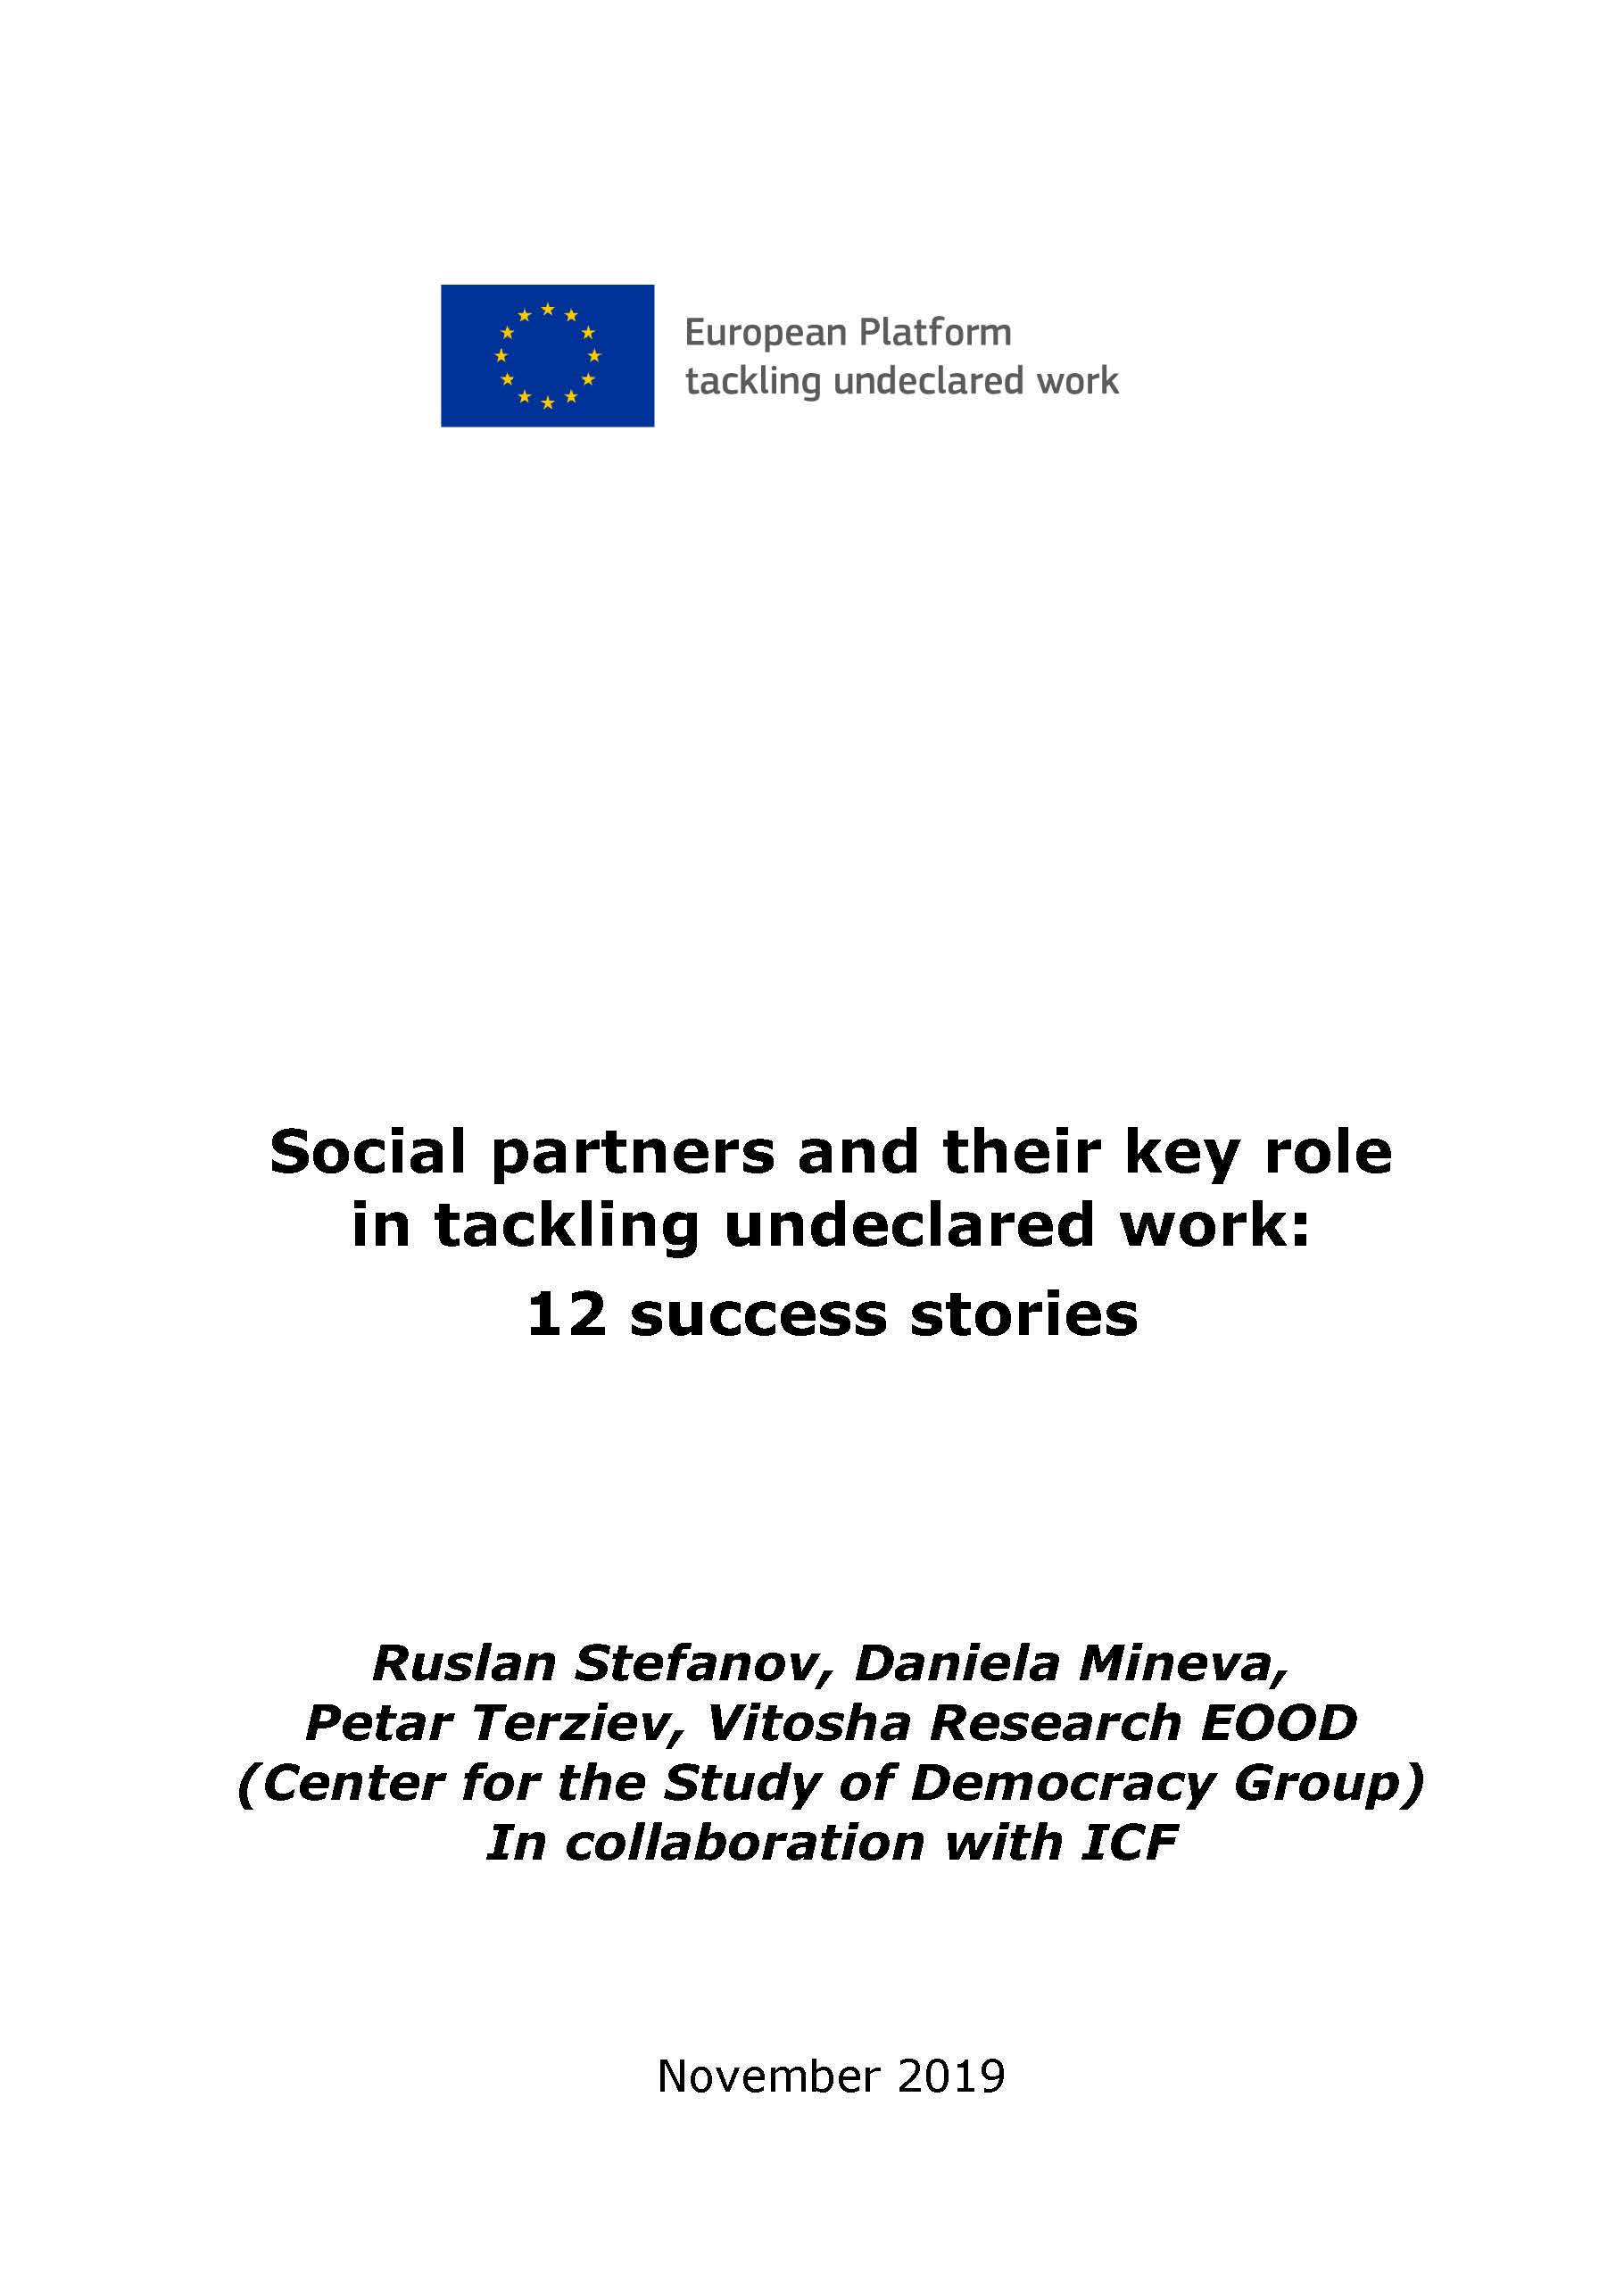 Social partners and their key role in tackling undeclared work: 12 success